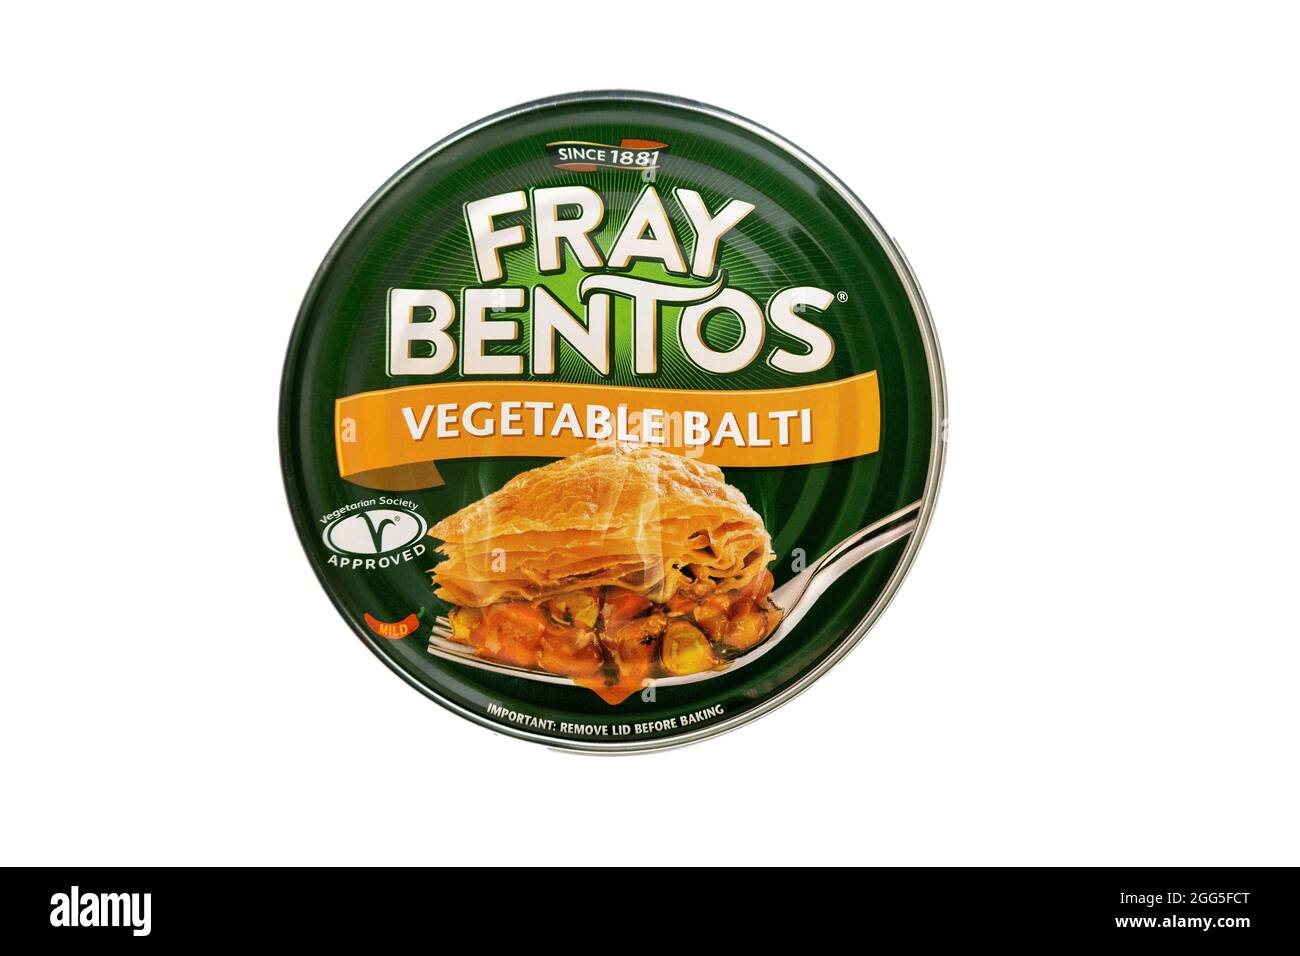 Fray Bentos Indian Vegetable Balti Pie In A Tin Fray Bentos Famous For Their Flaky Pastry Pies In A Tin Stock Photo